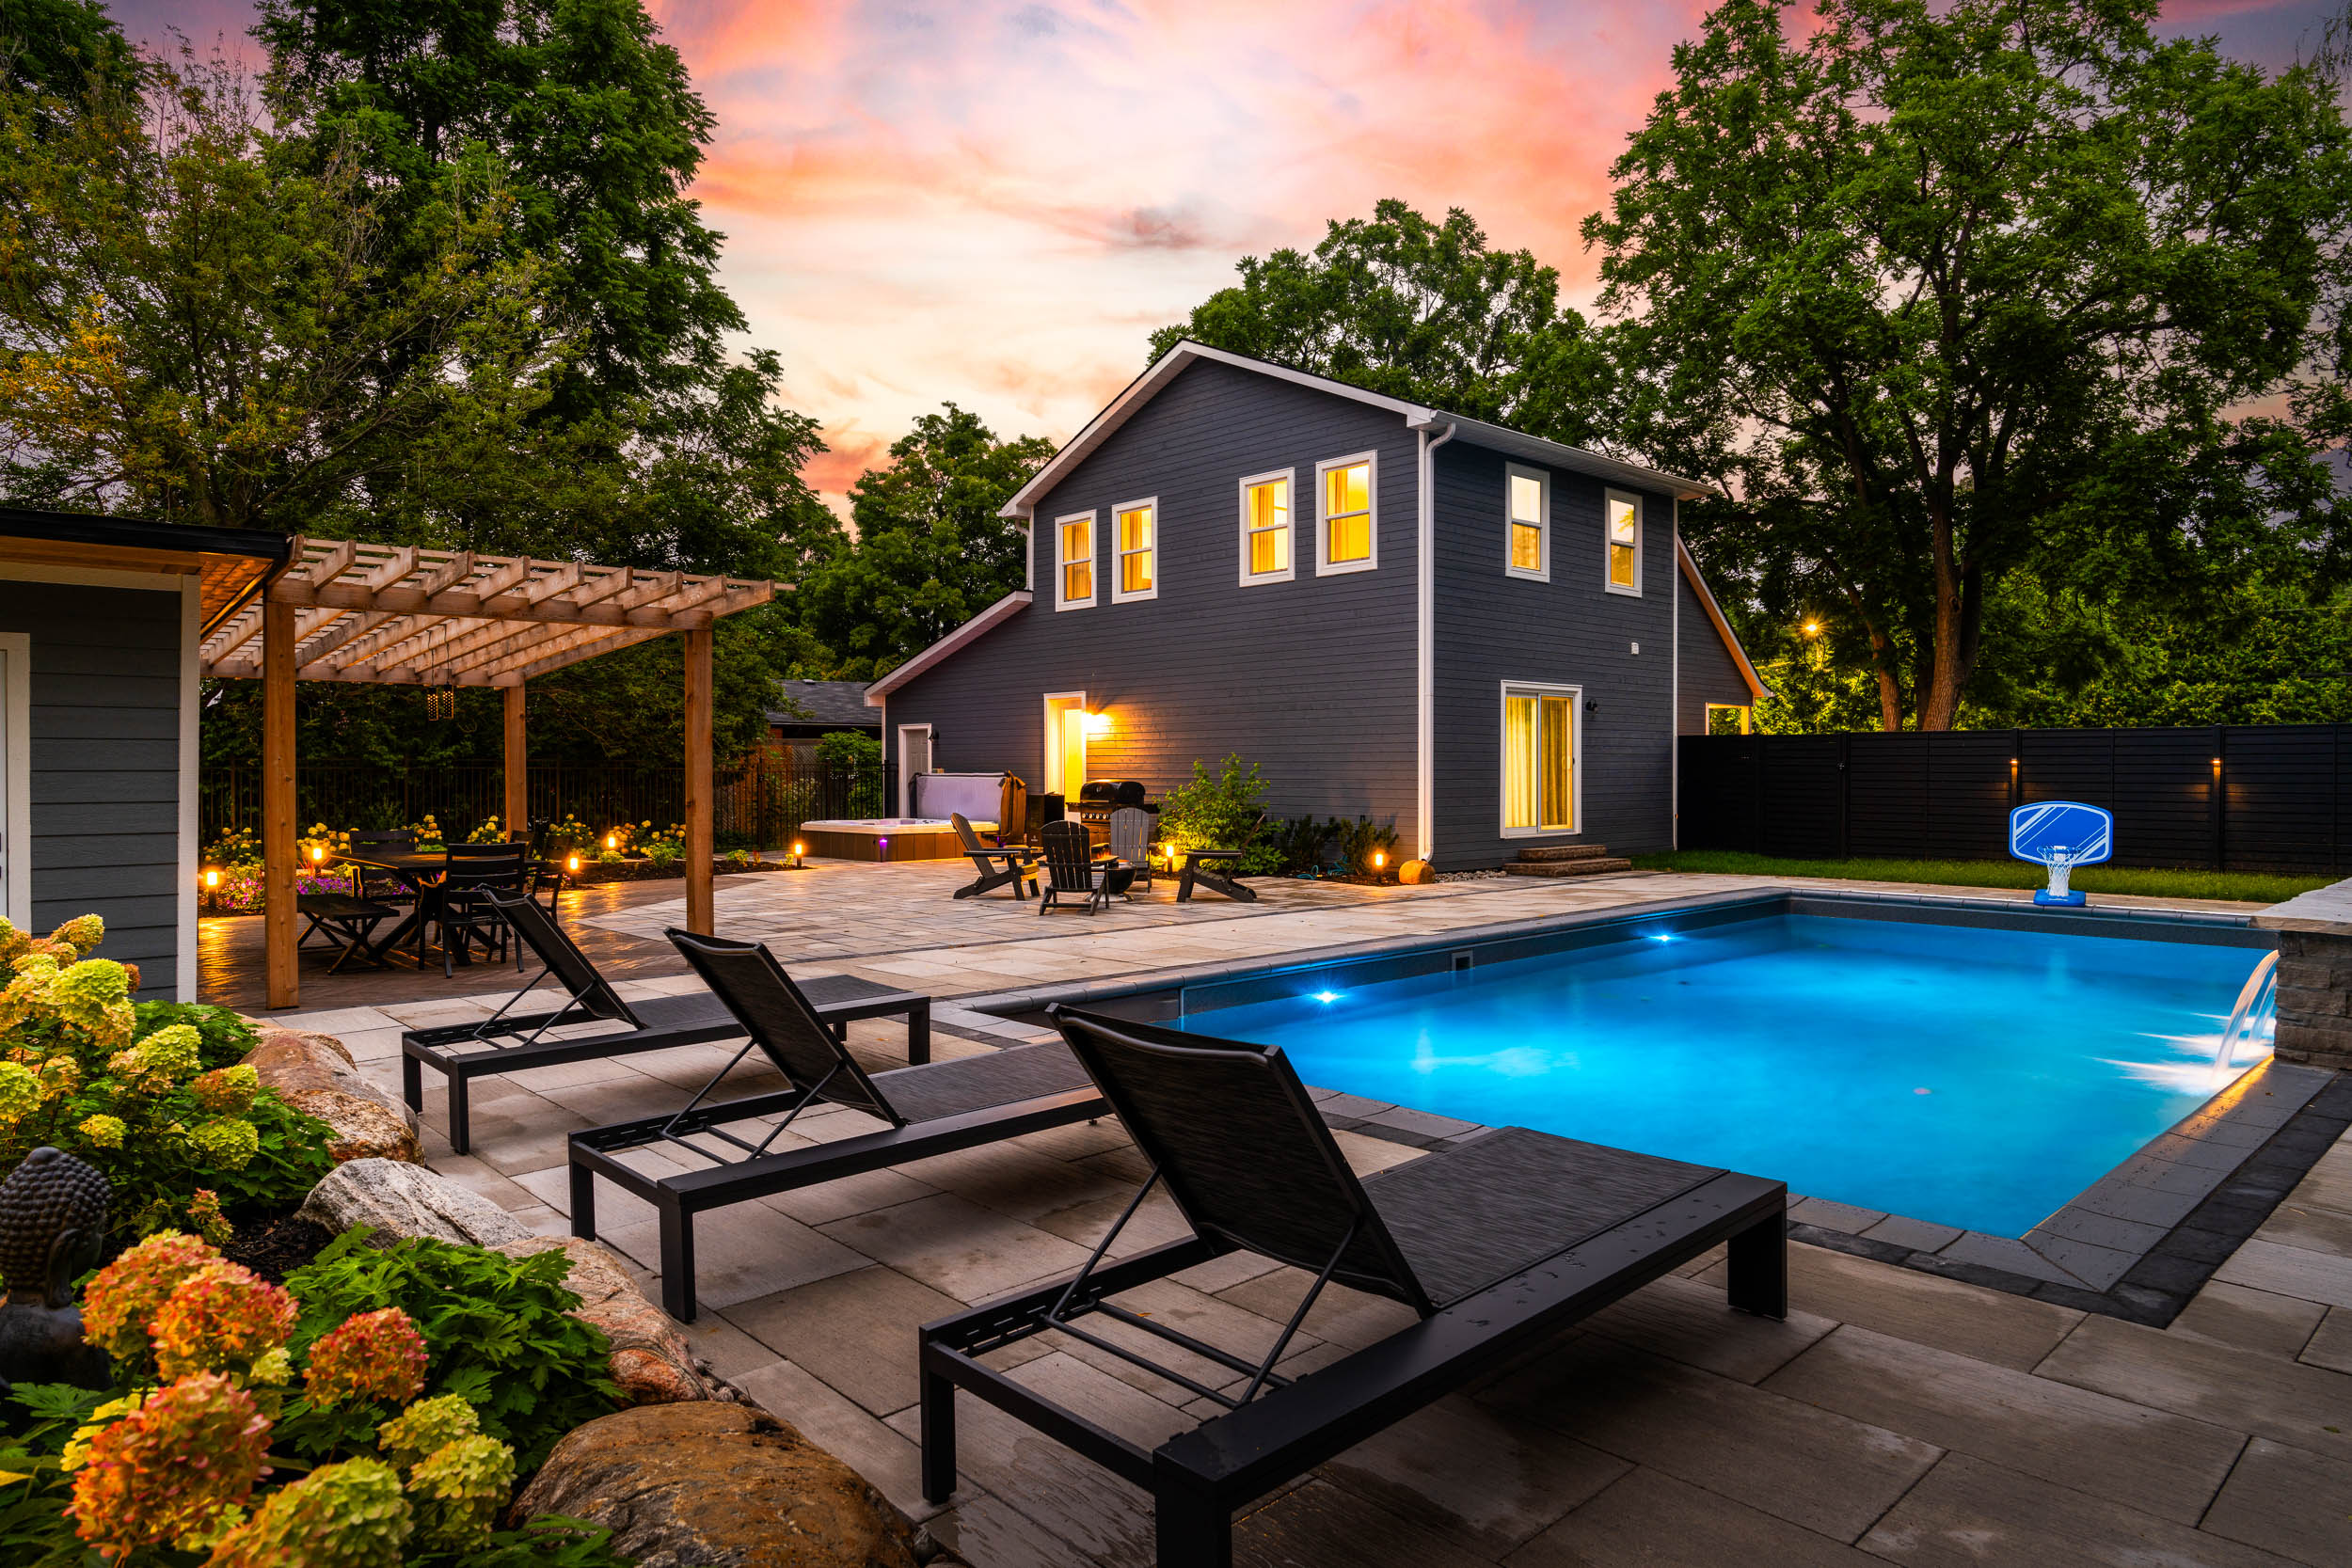 This image shows a modern two-story house with an outdoor swimming pool, lounge chairs, a pergola, and a dining area during a colorful sunset.